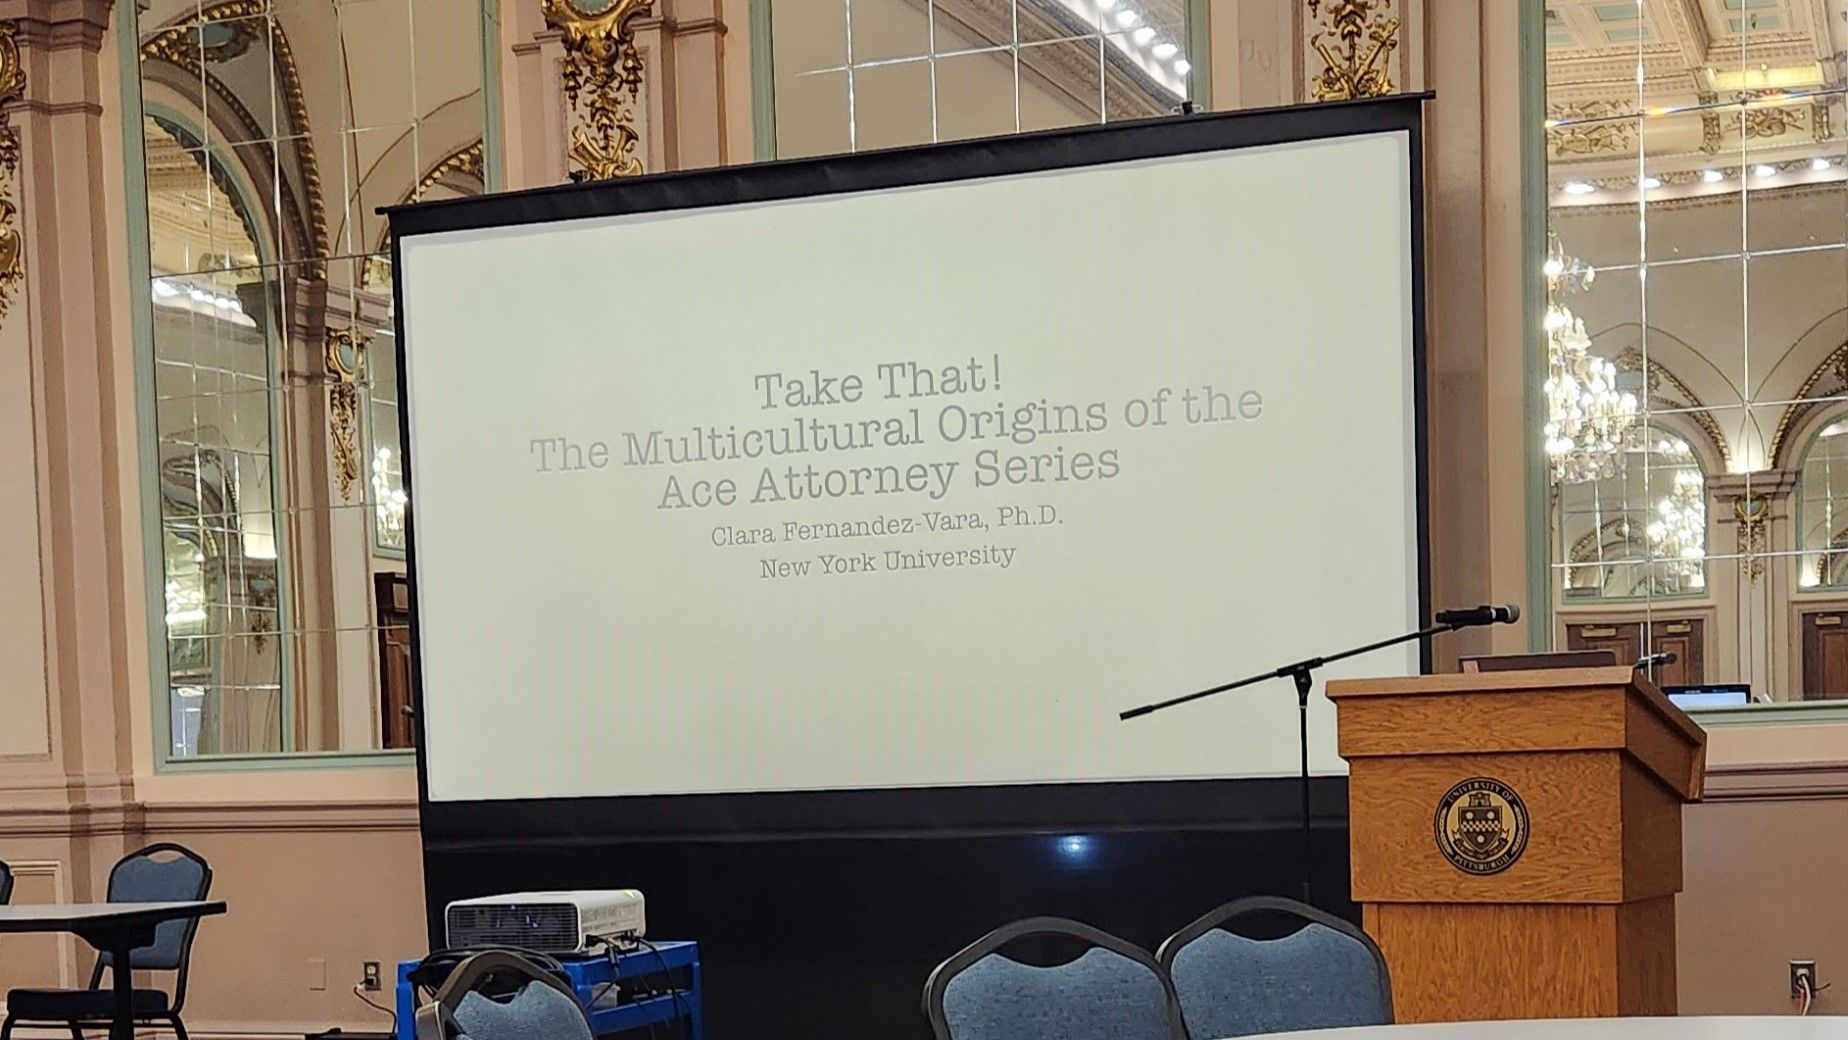 A projector screen with the words "Take That! The Multicultural Origins of the Ace Attorney Series"